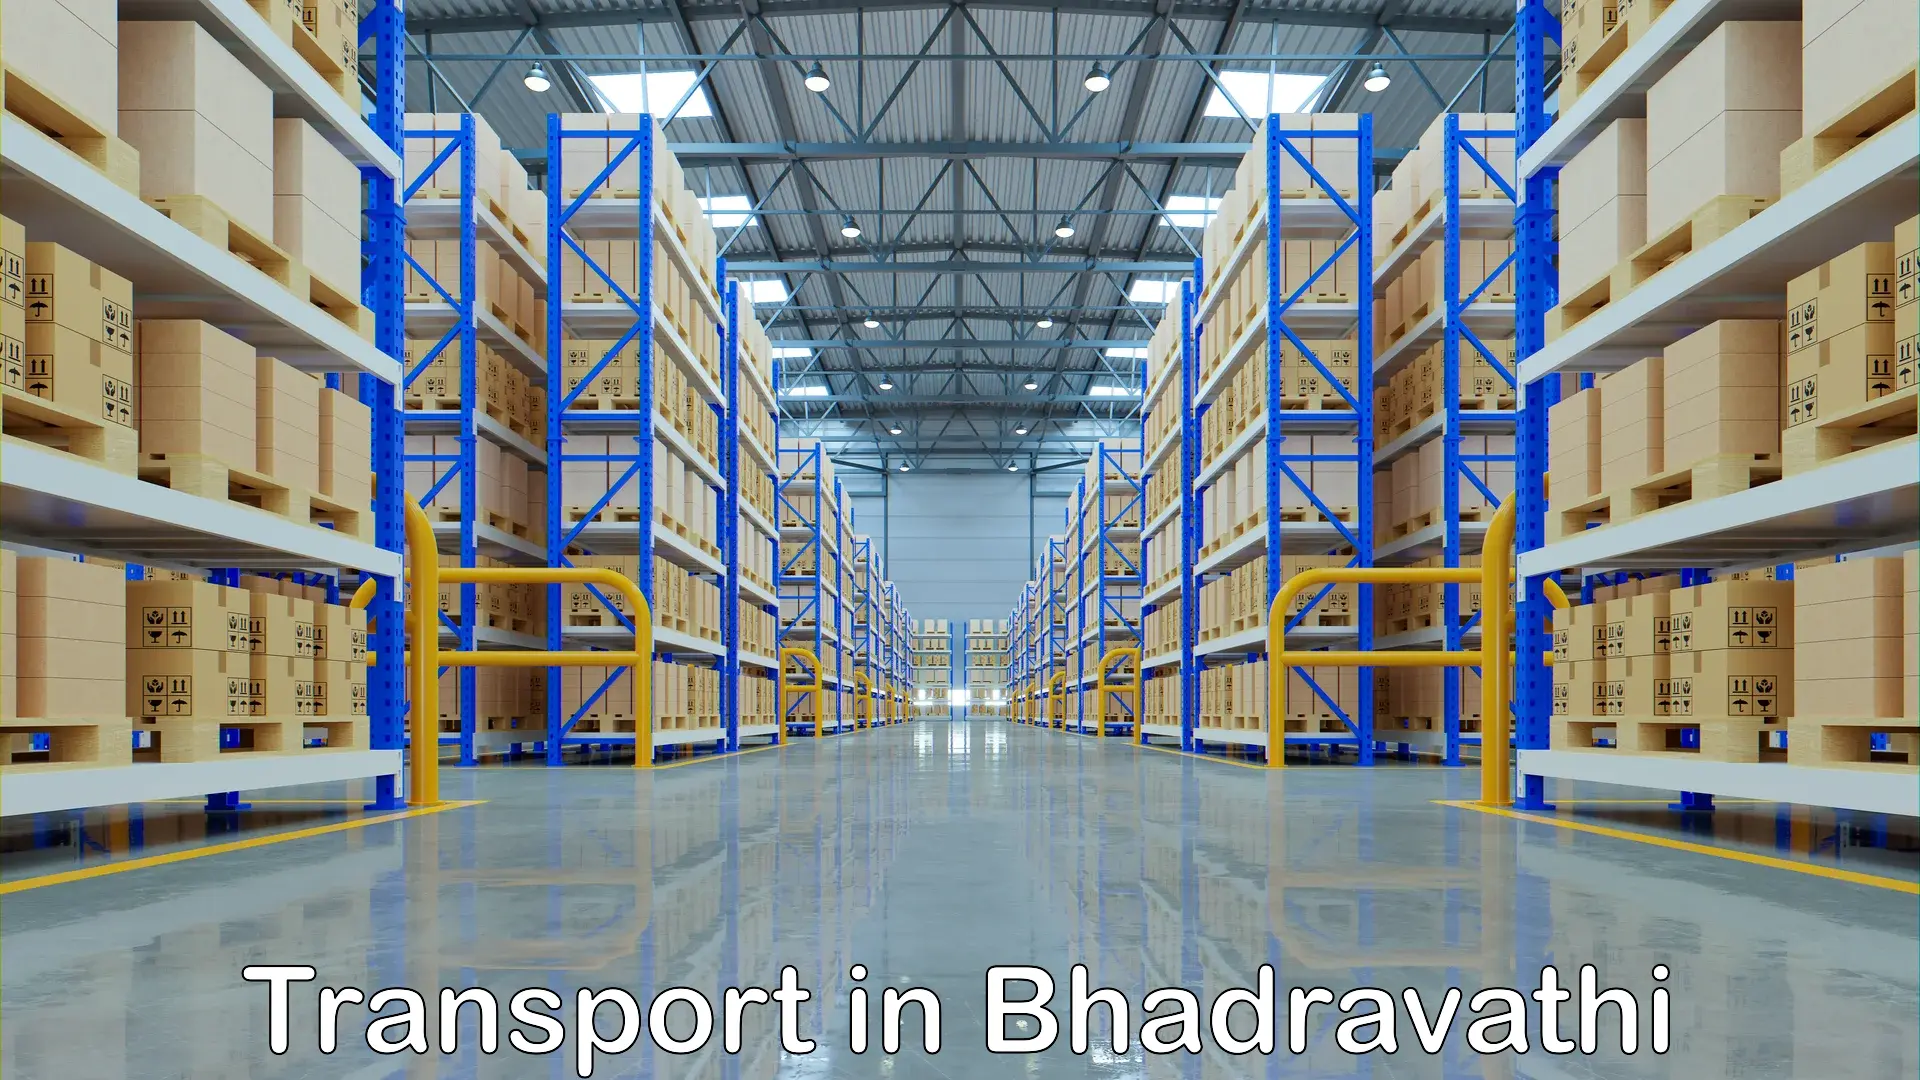 Container transport service in Bhadravathi